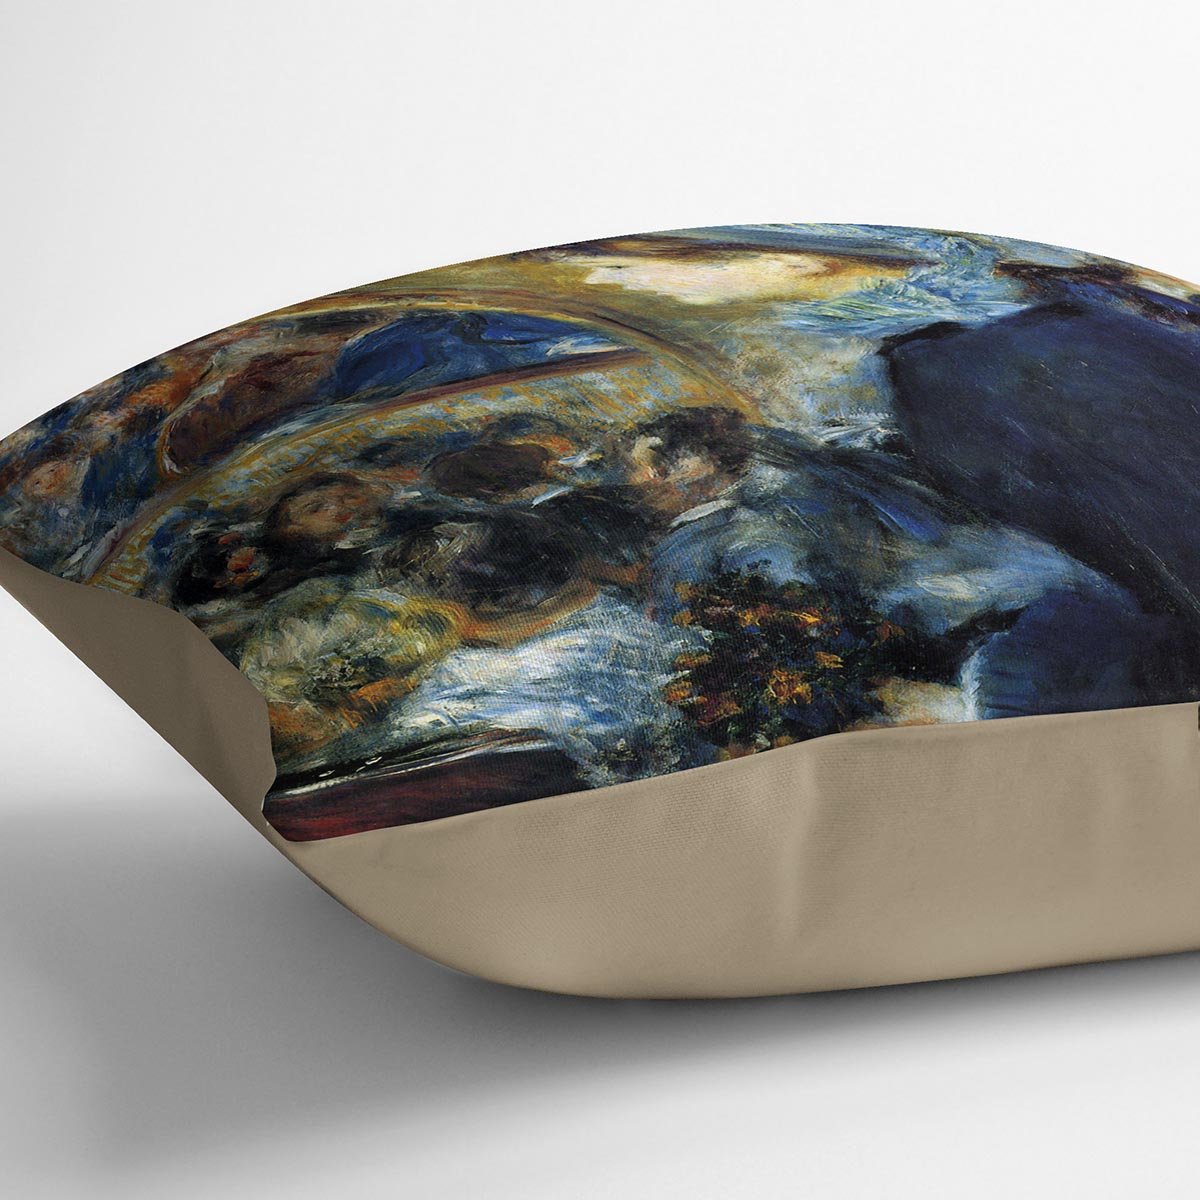 At the theatre by Renoir Throw Pillow